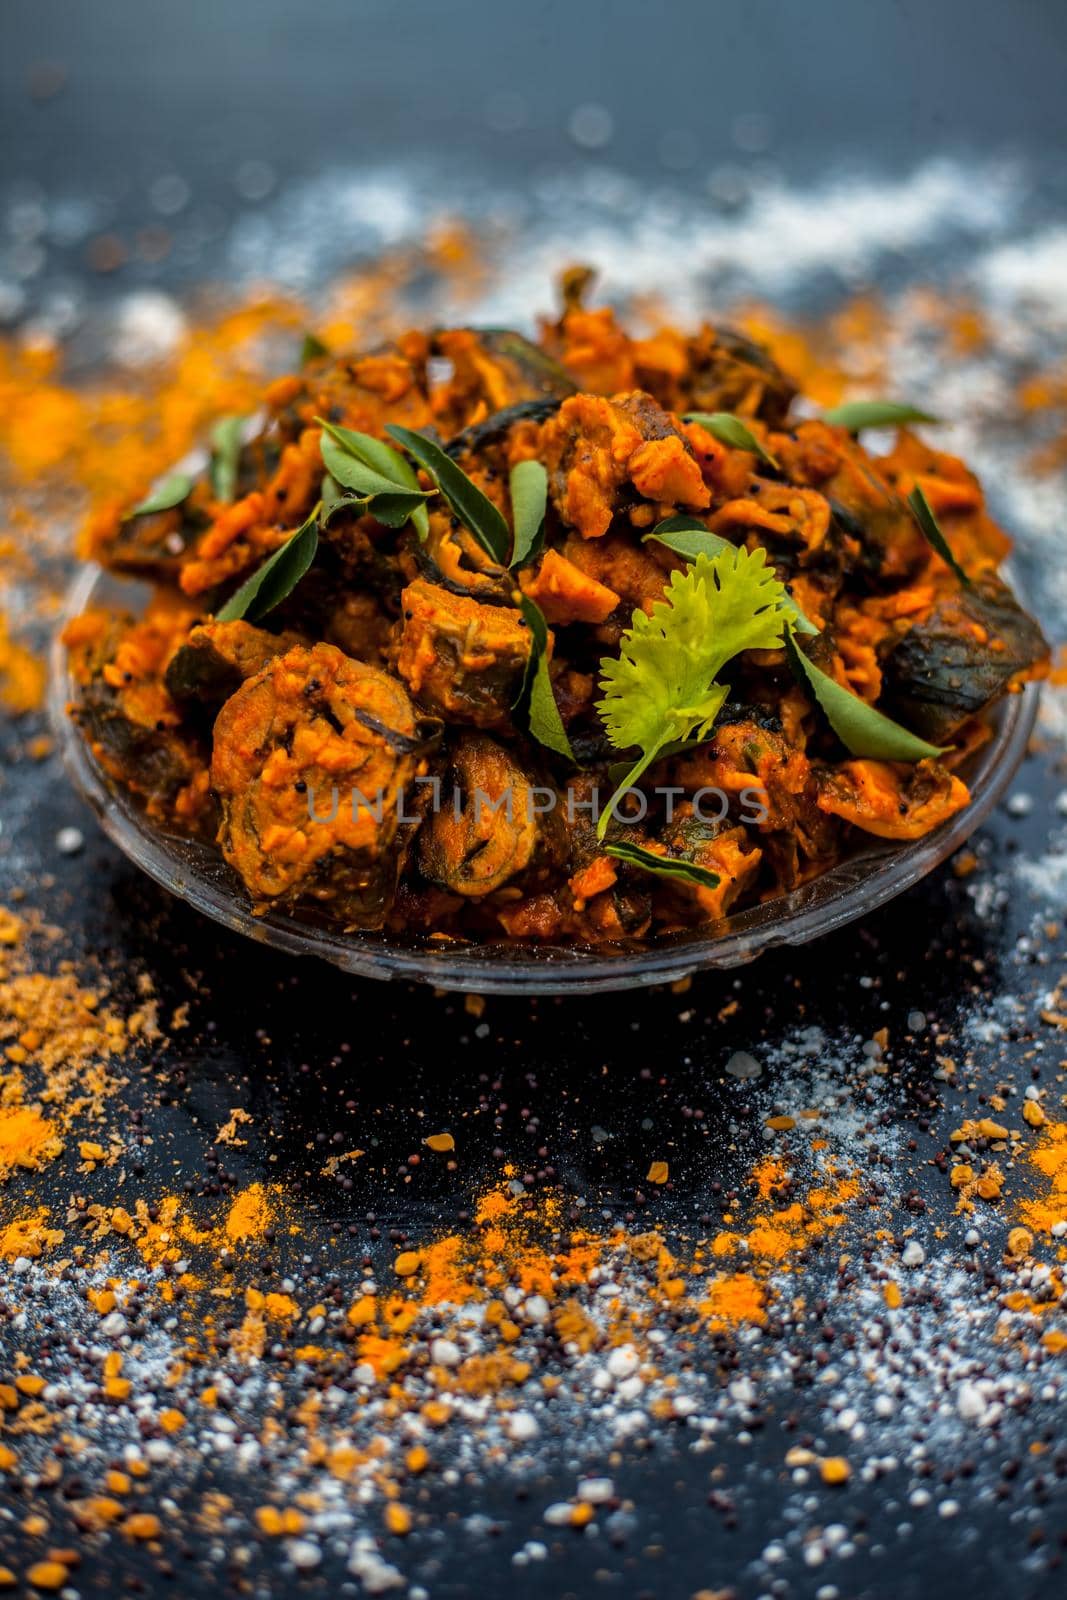 Famous Indian & Gujarati snack dish in a glass plate on wooden surface i.e. Patra or paatra consisting of mainly Colocasia esculenta or arbi ke pan or elephant ear leaves and spices. Vertical shot. by mirzamlk